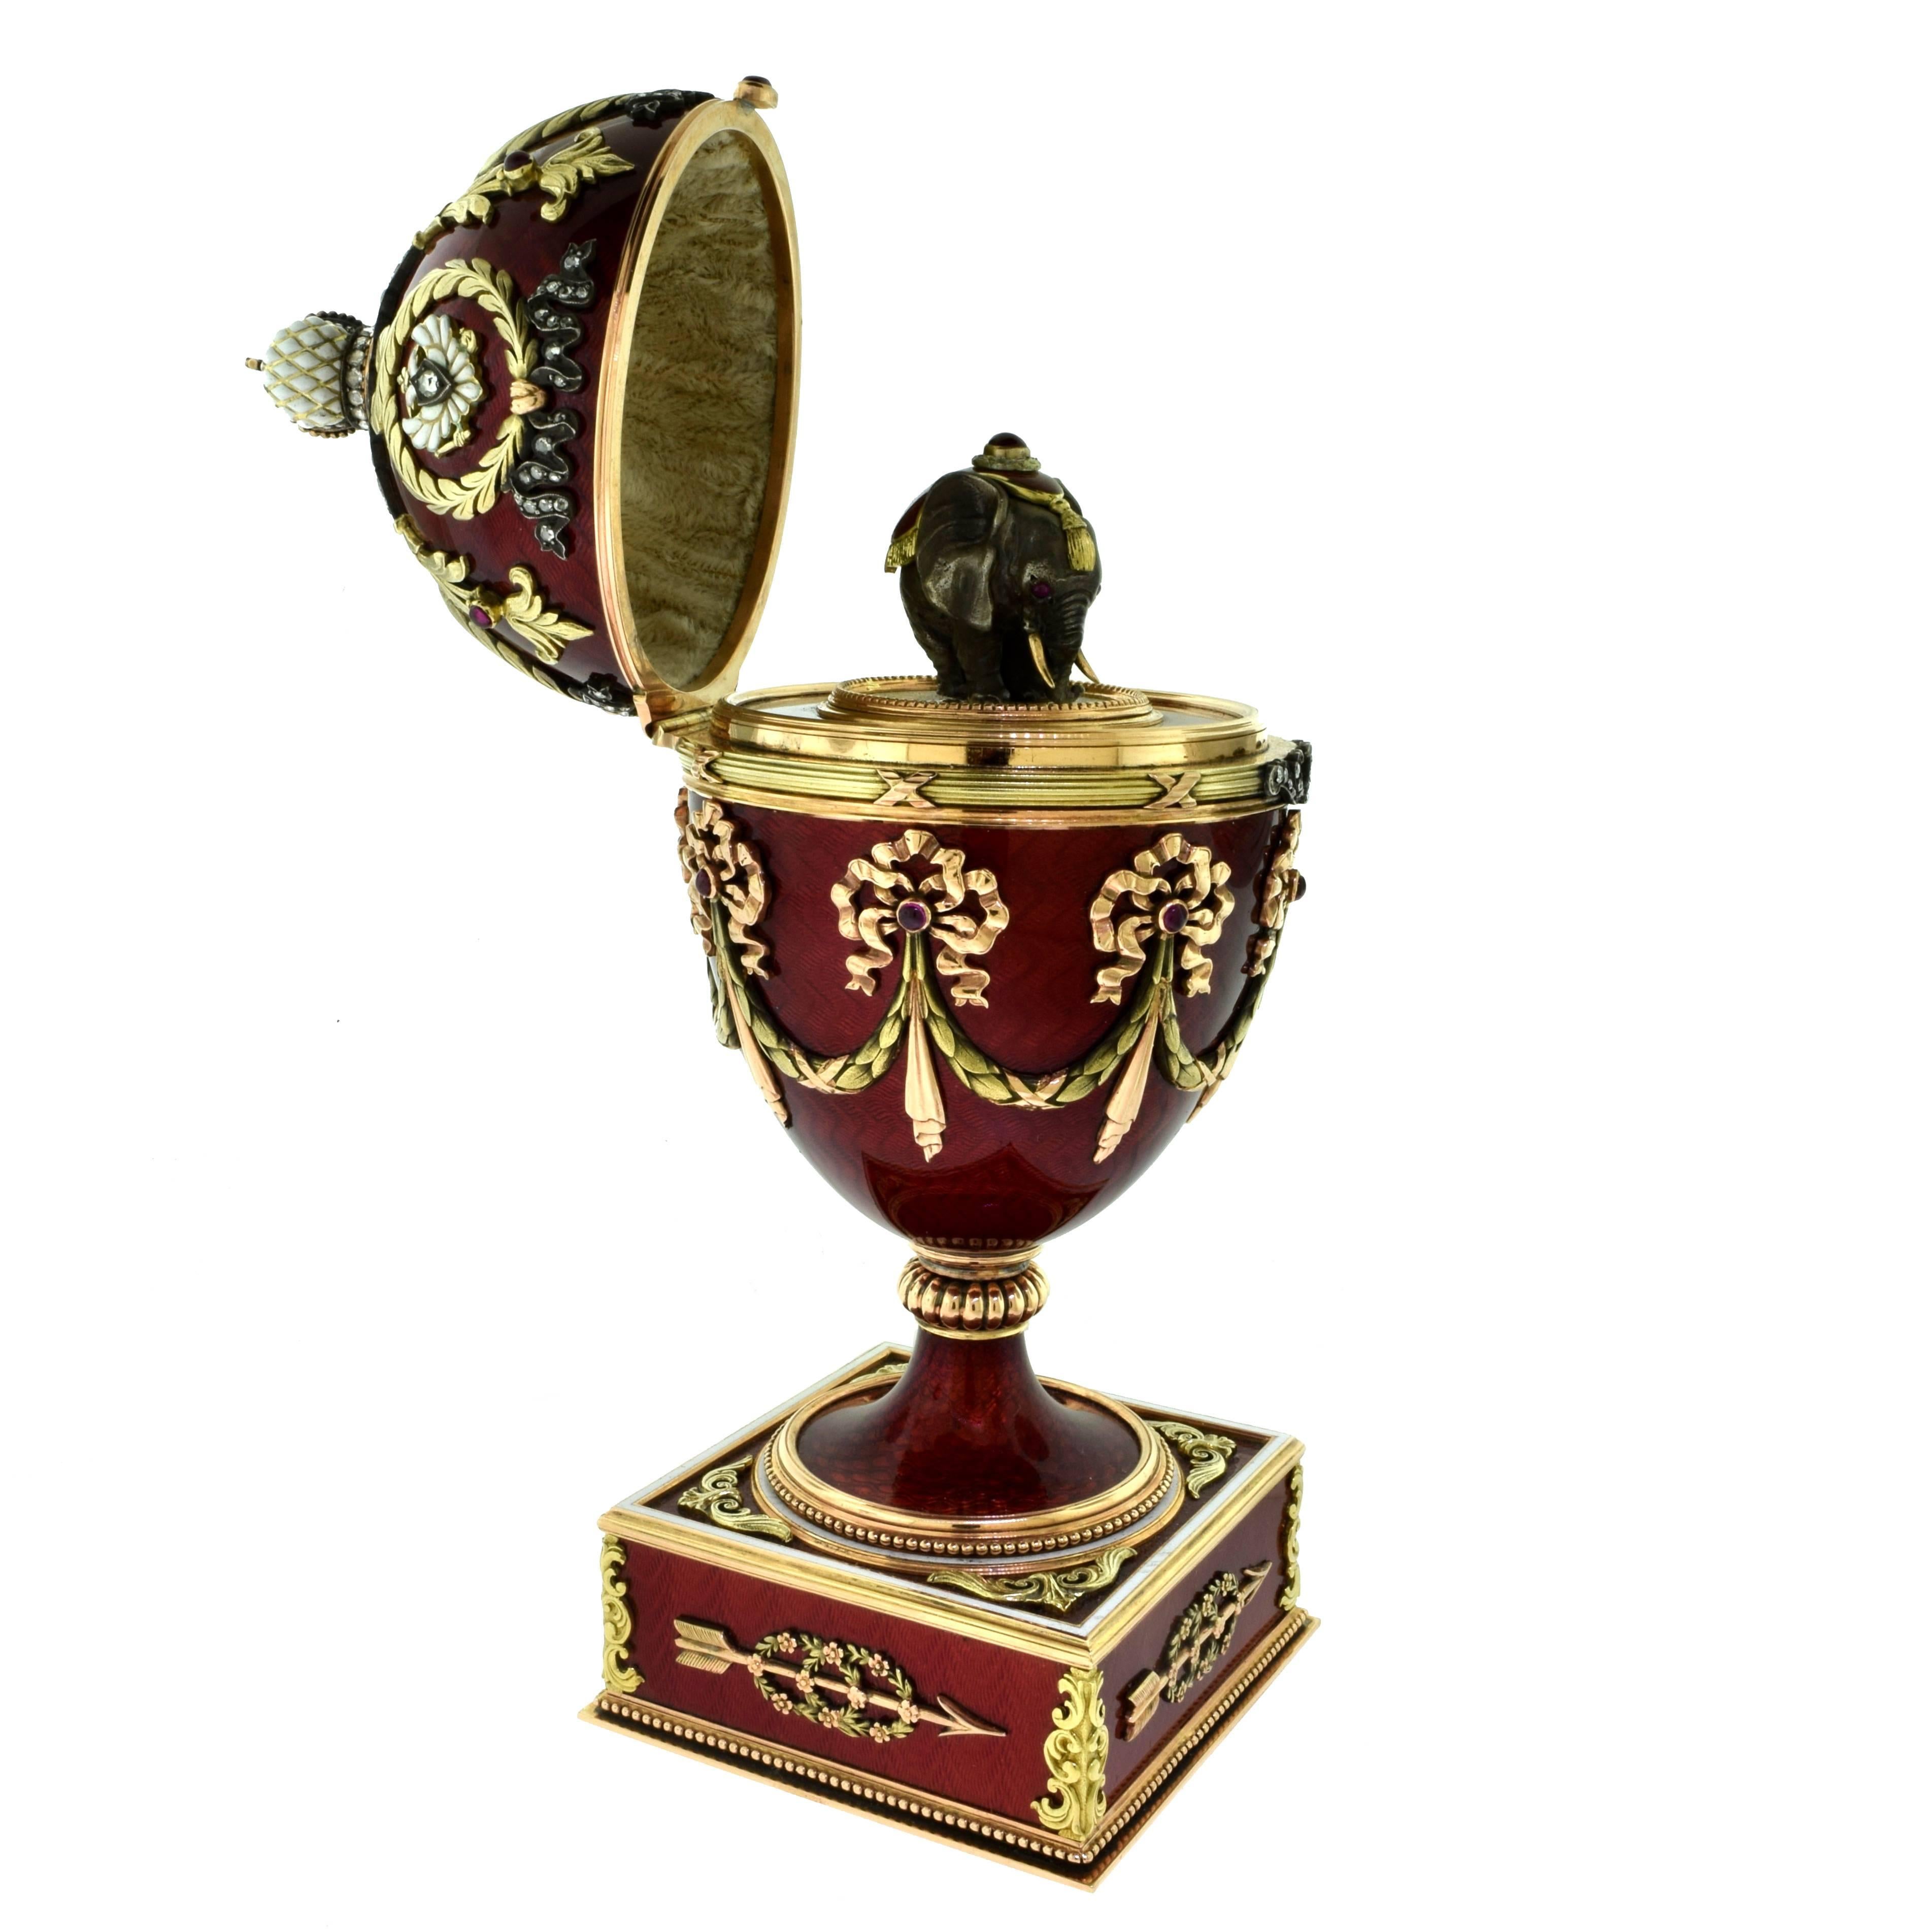 This is a magnificent Russian Huge Jeweled Gold Guilloche Egg with Diamonds, Rubies and covered in Red Enamel. The diamond and ruby thumb piece released the hinged cover to reveal a 